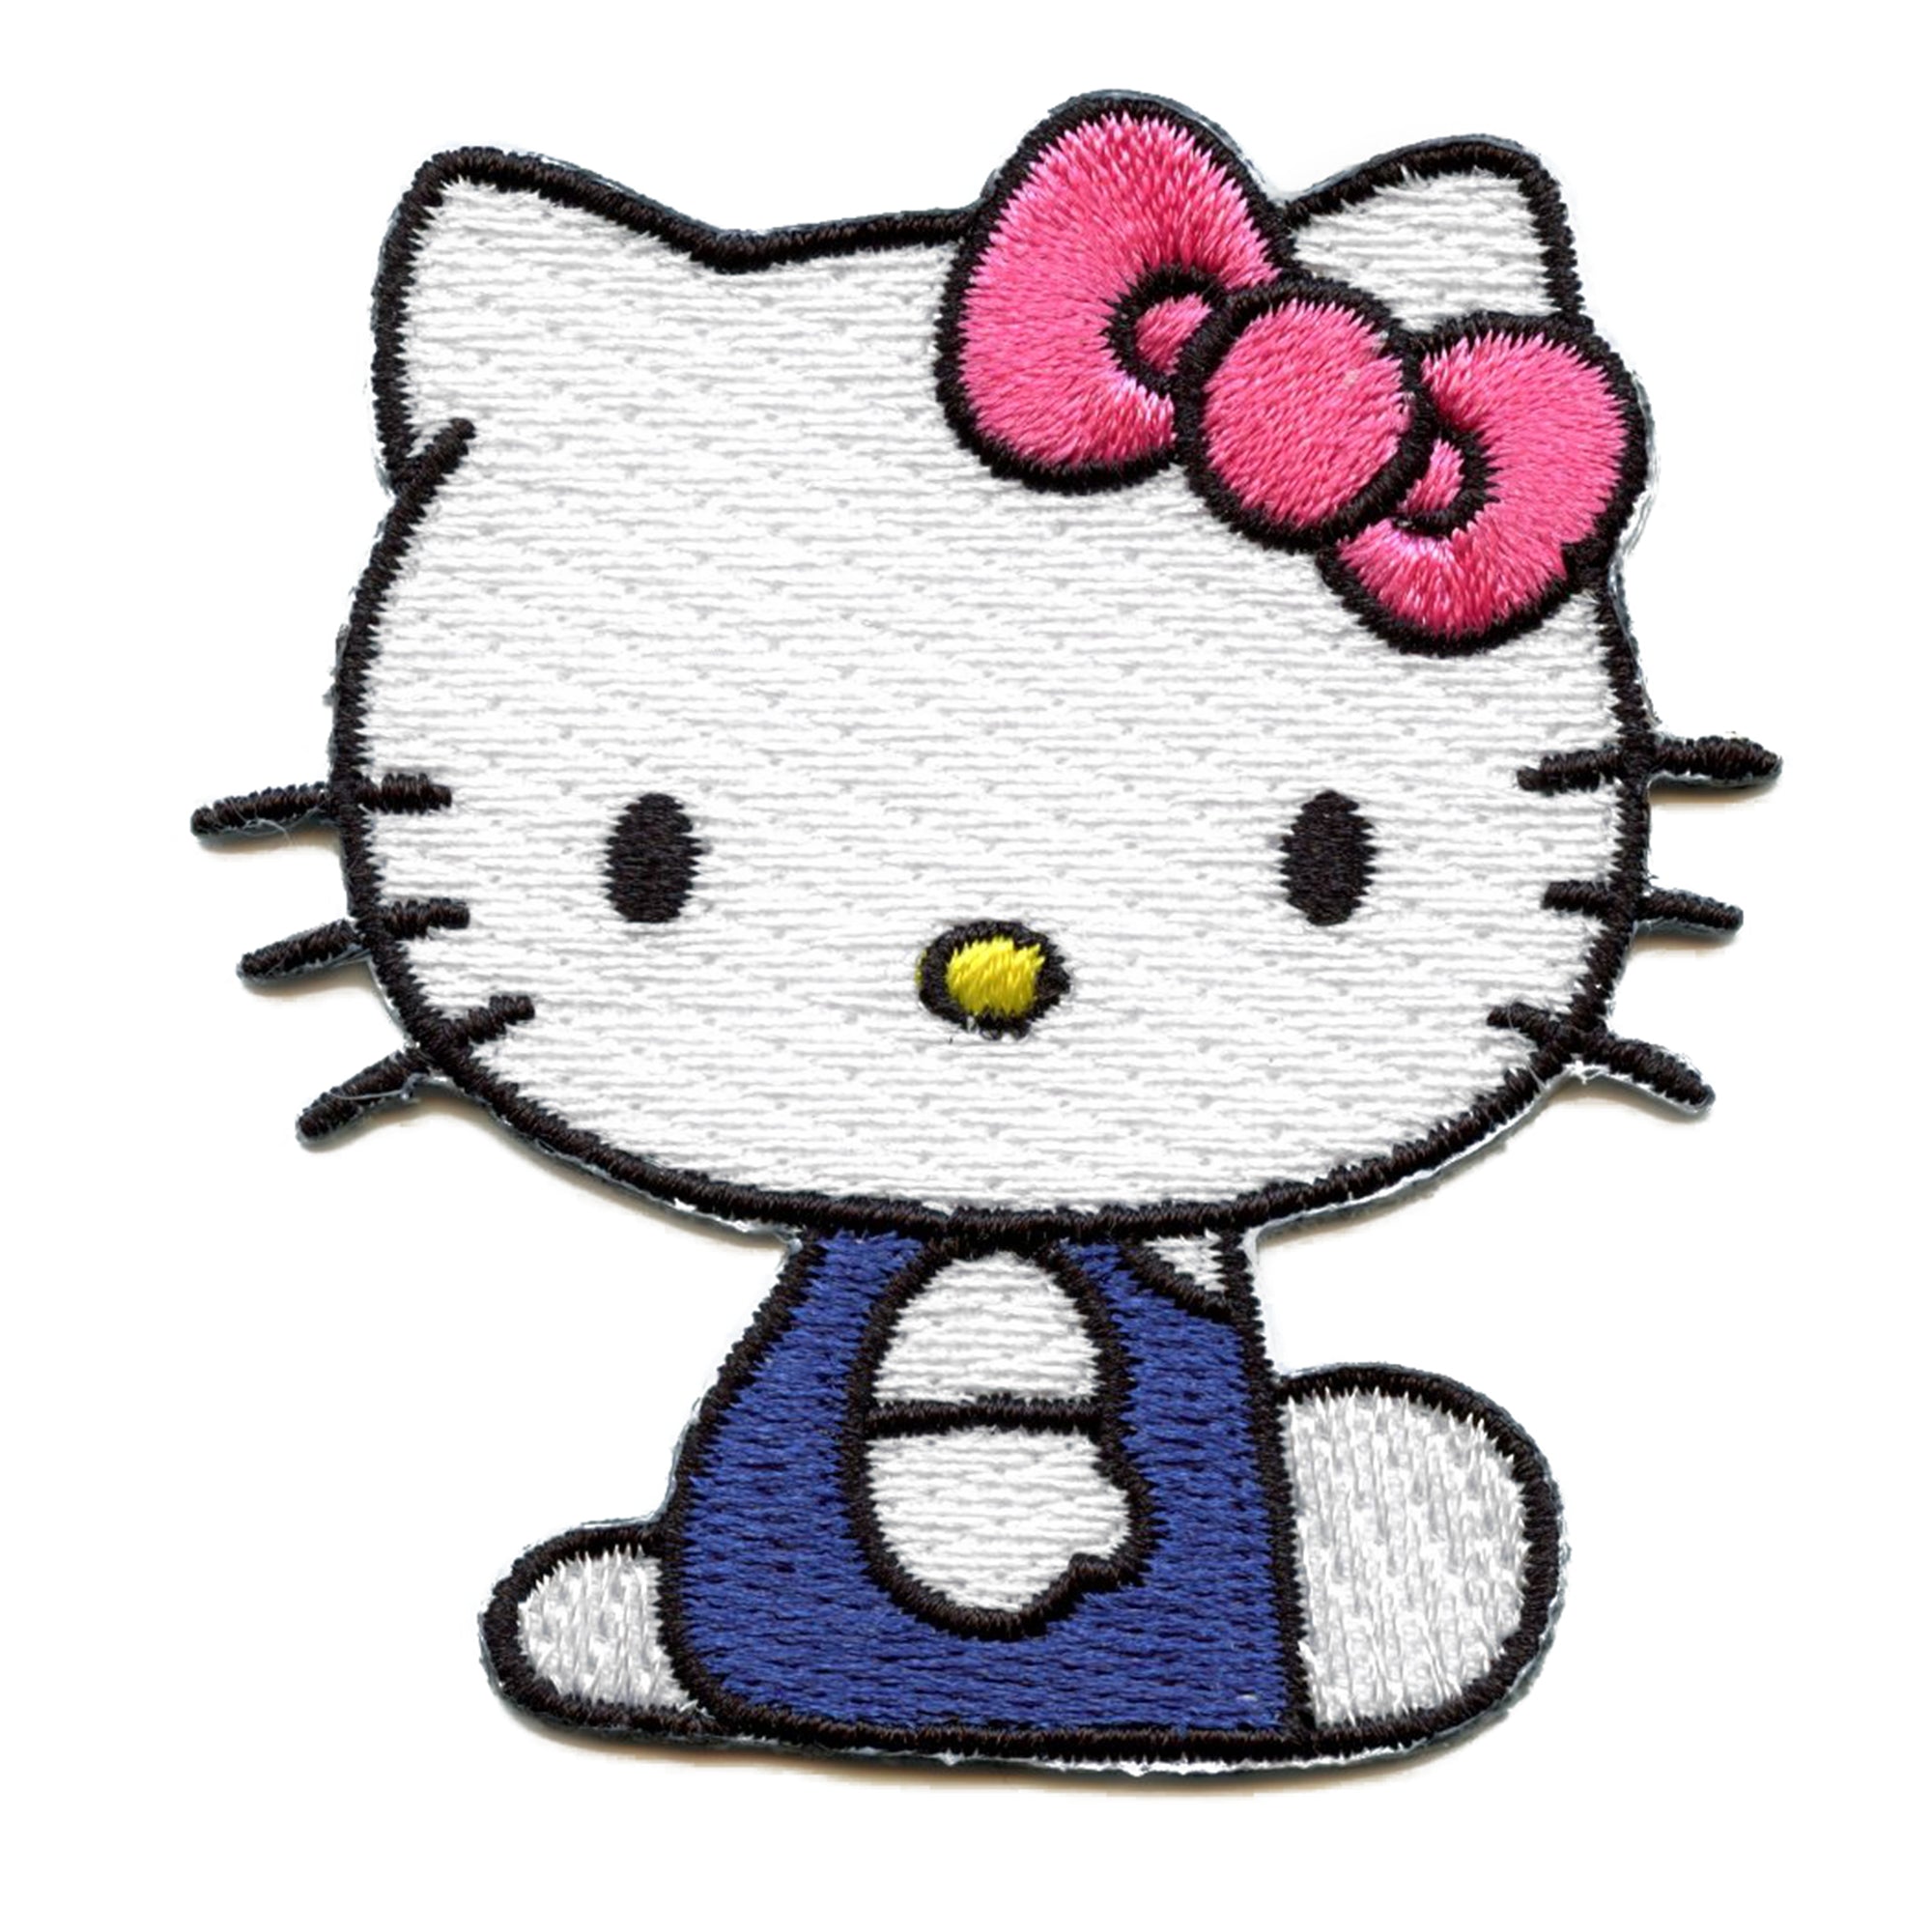 HELLO KITTY HUG, Officially Licensed, Iron-On / Sew-On, Embroidered PATCH -  3 x 3.5 